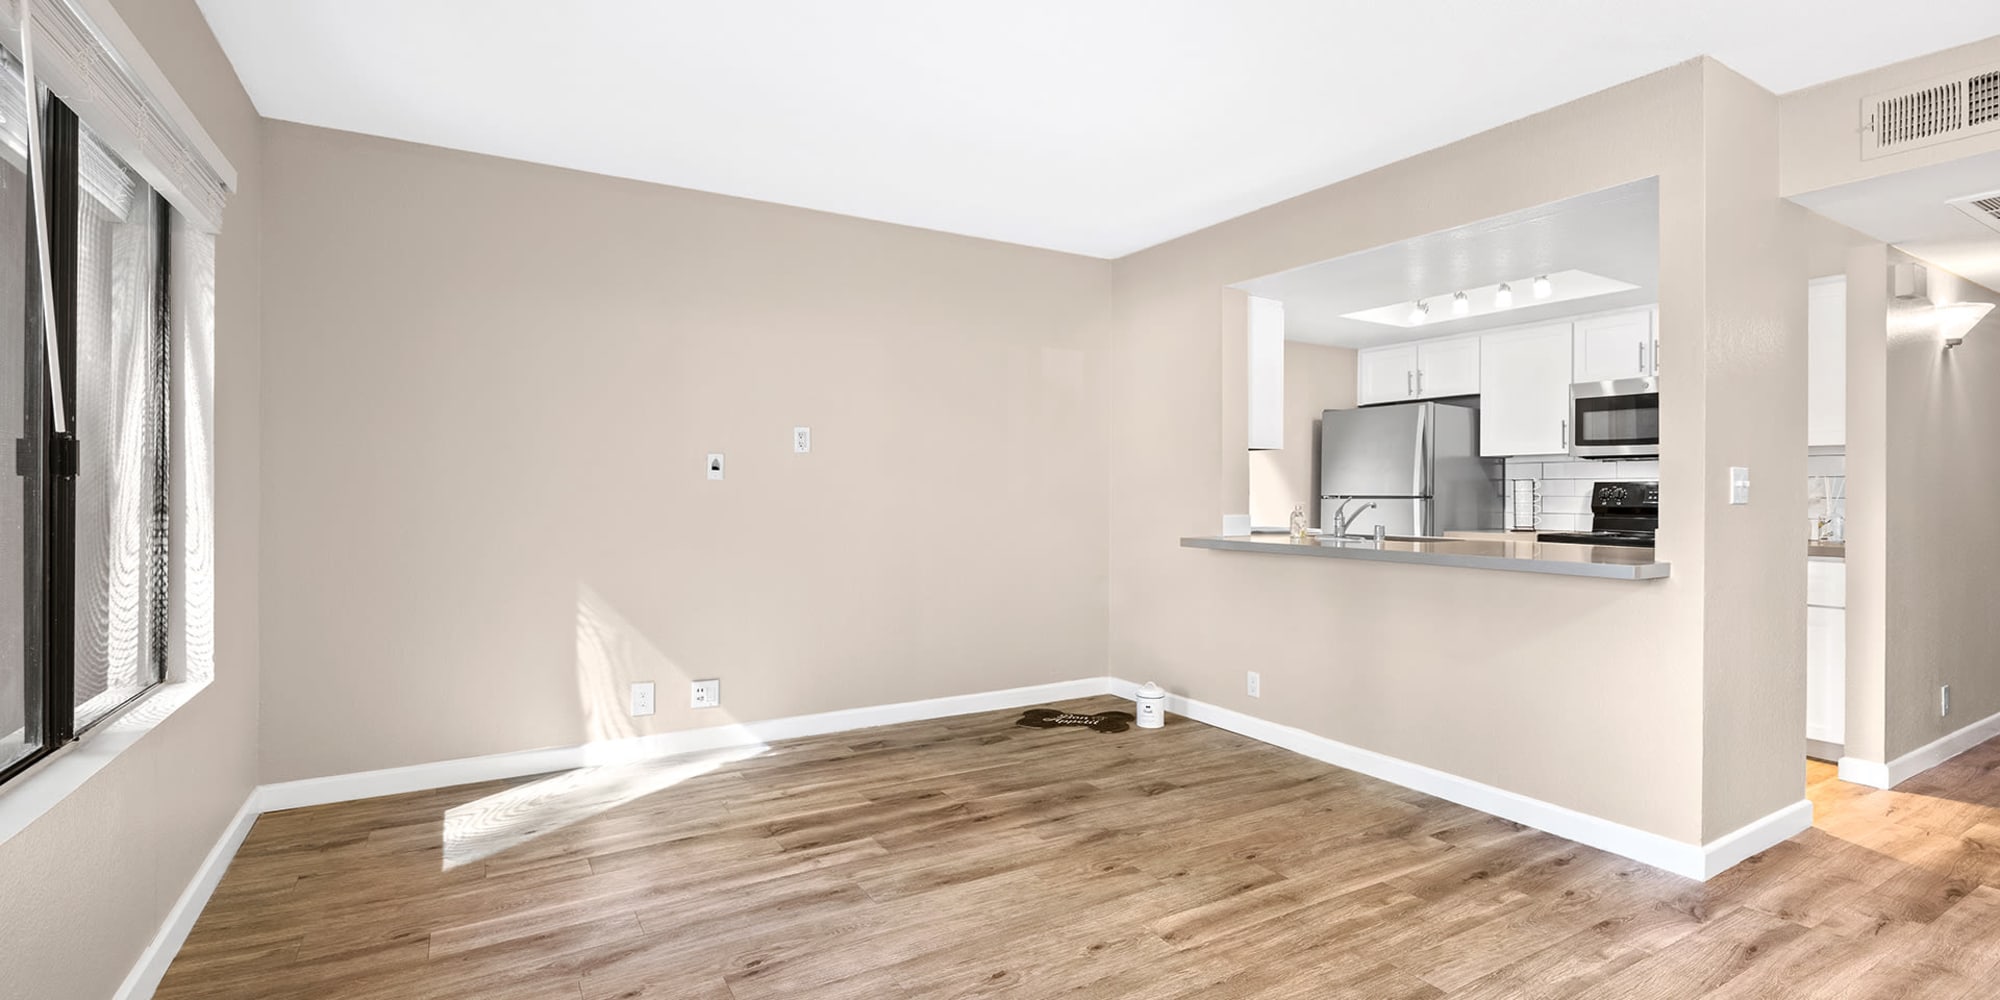 Spacious apartment with wood-style flooring at Trails at Grand Terrace in Colton, California